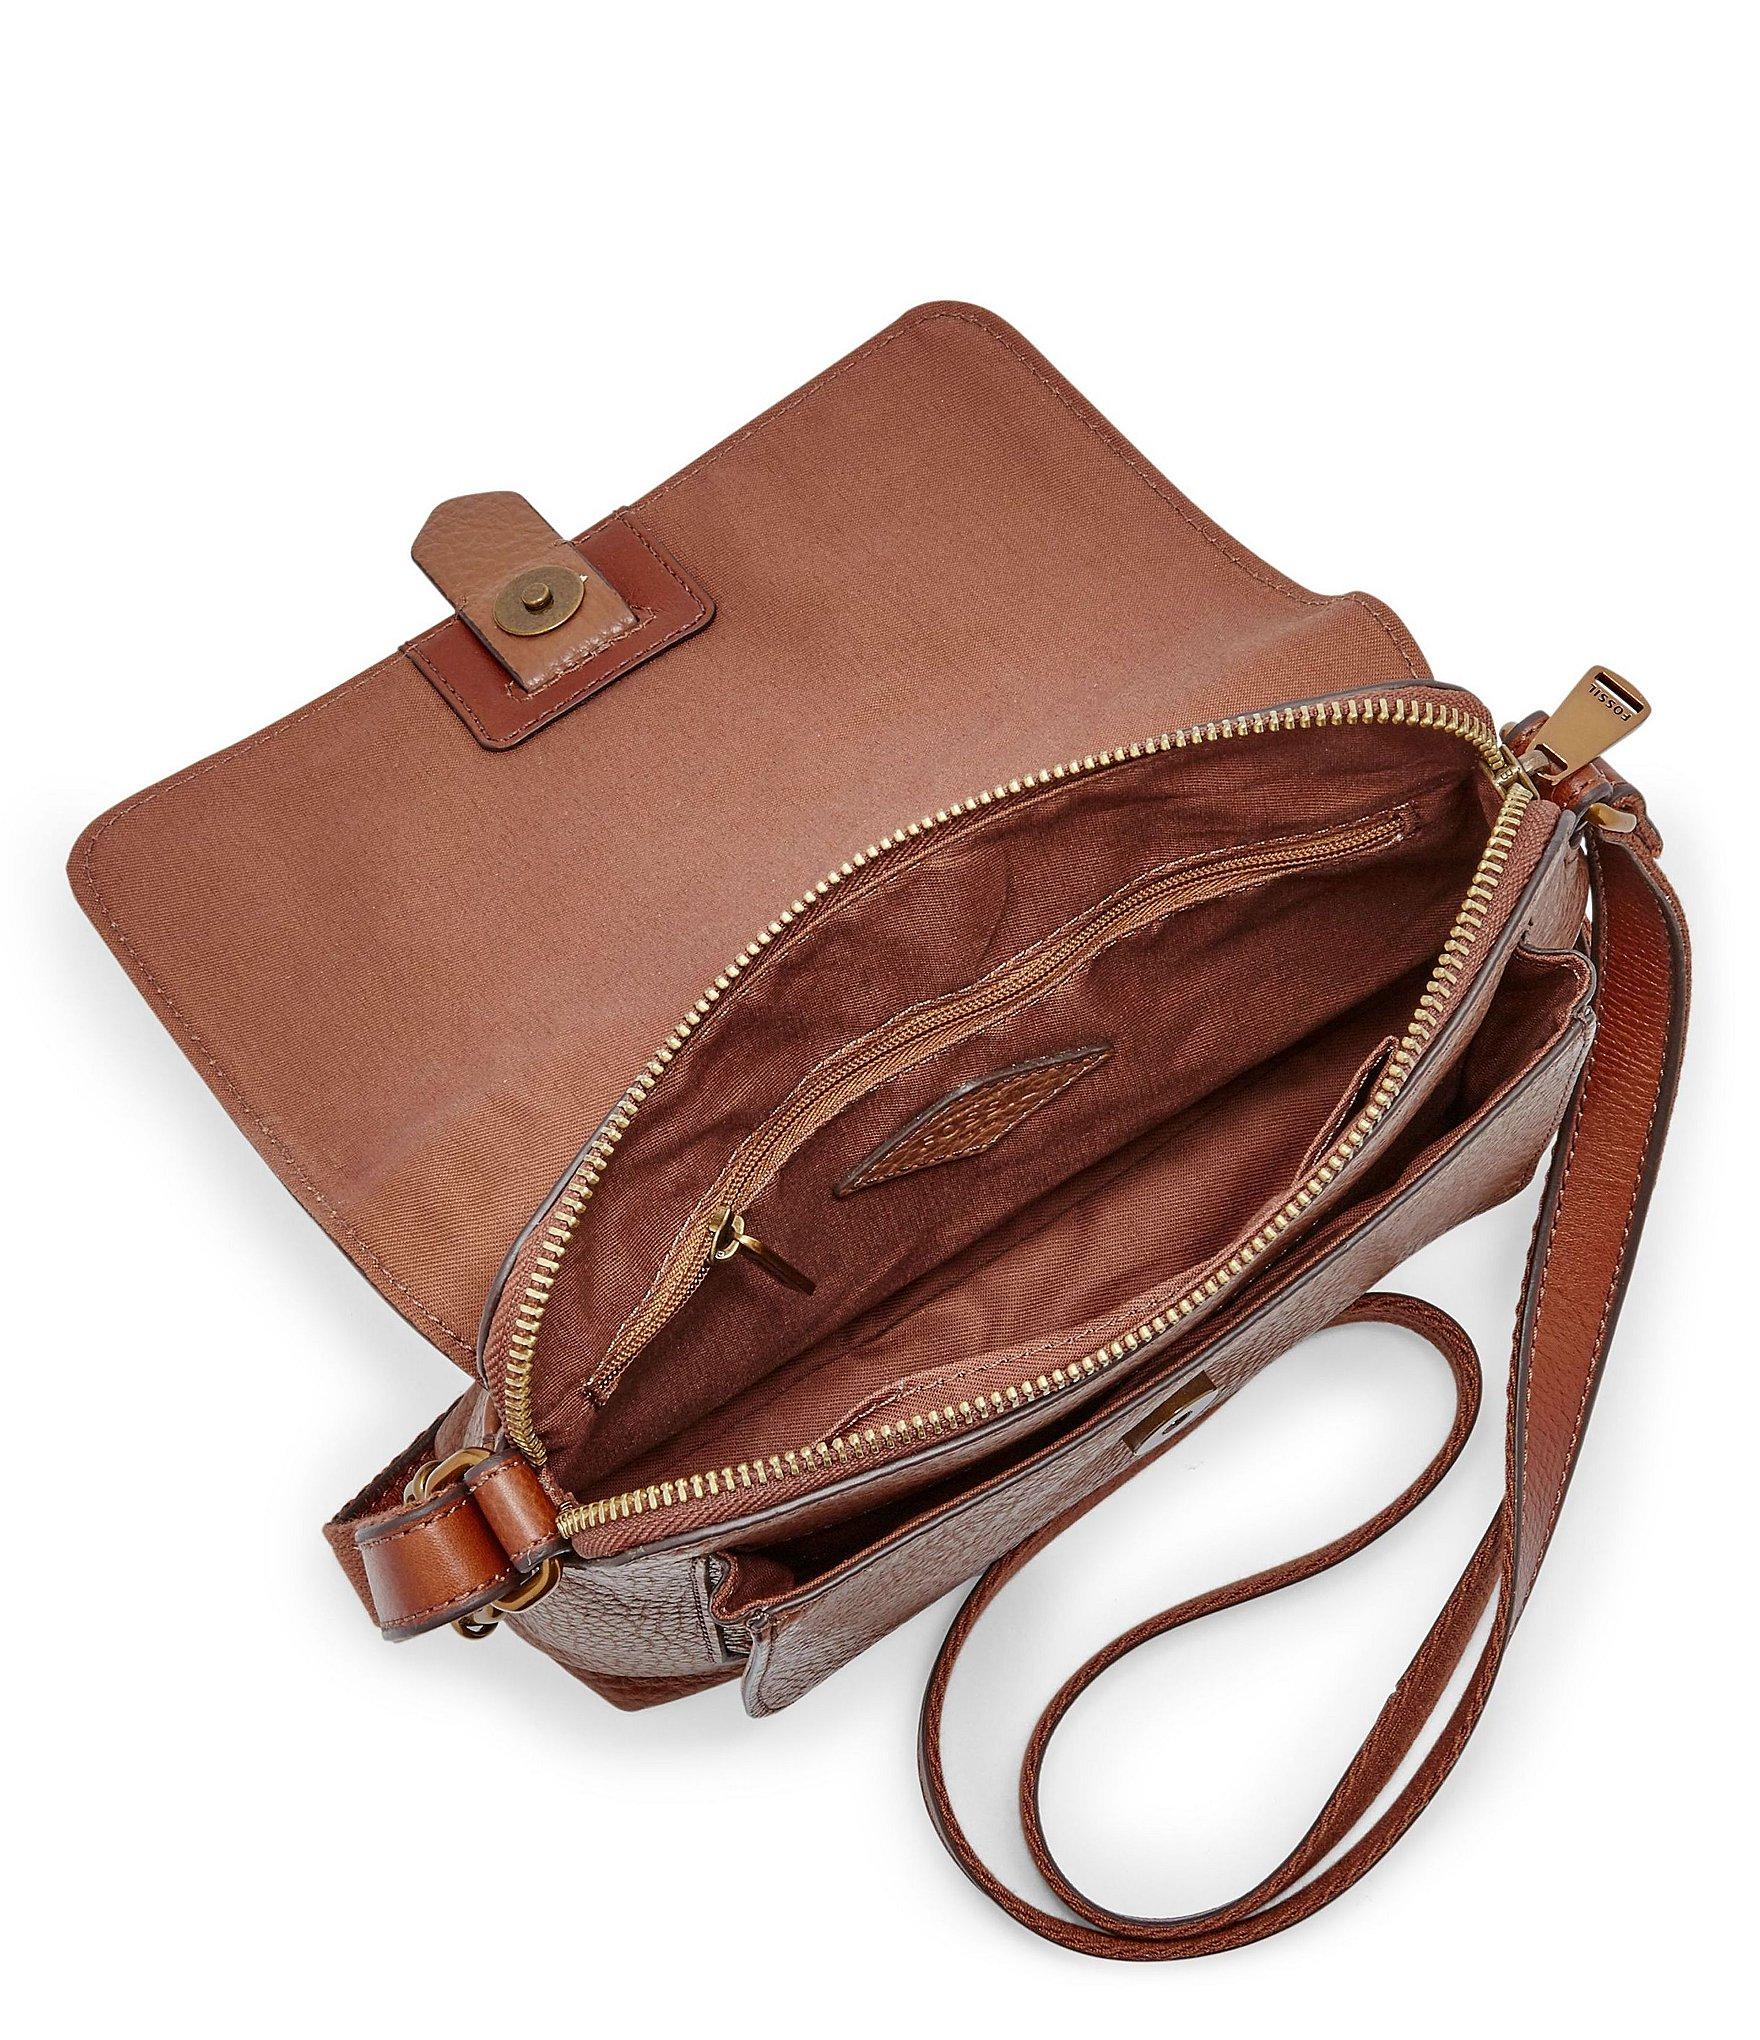 Fossil Cotton Kinley Small Crossbody Bag in Brown - Lyst